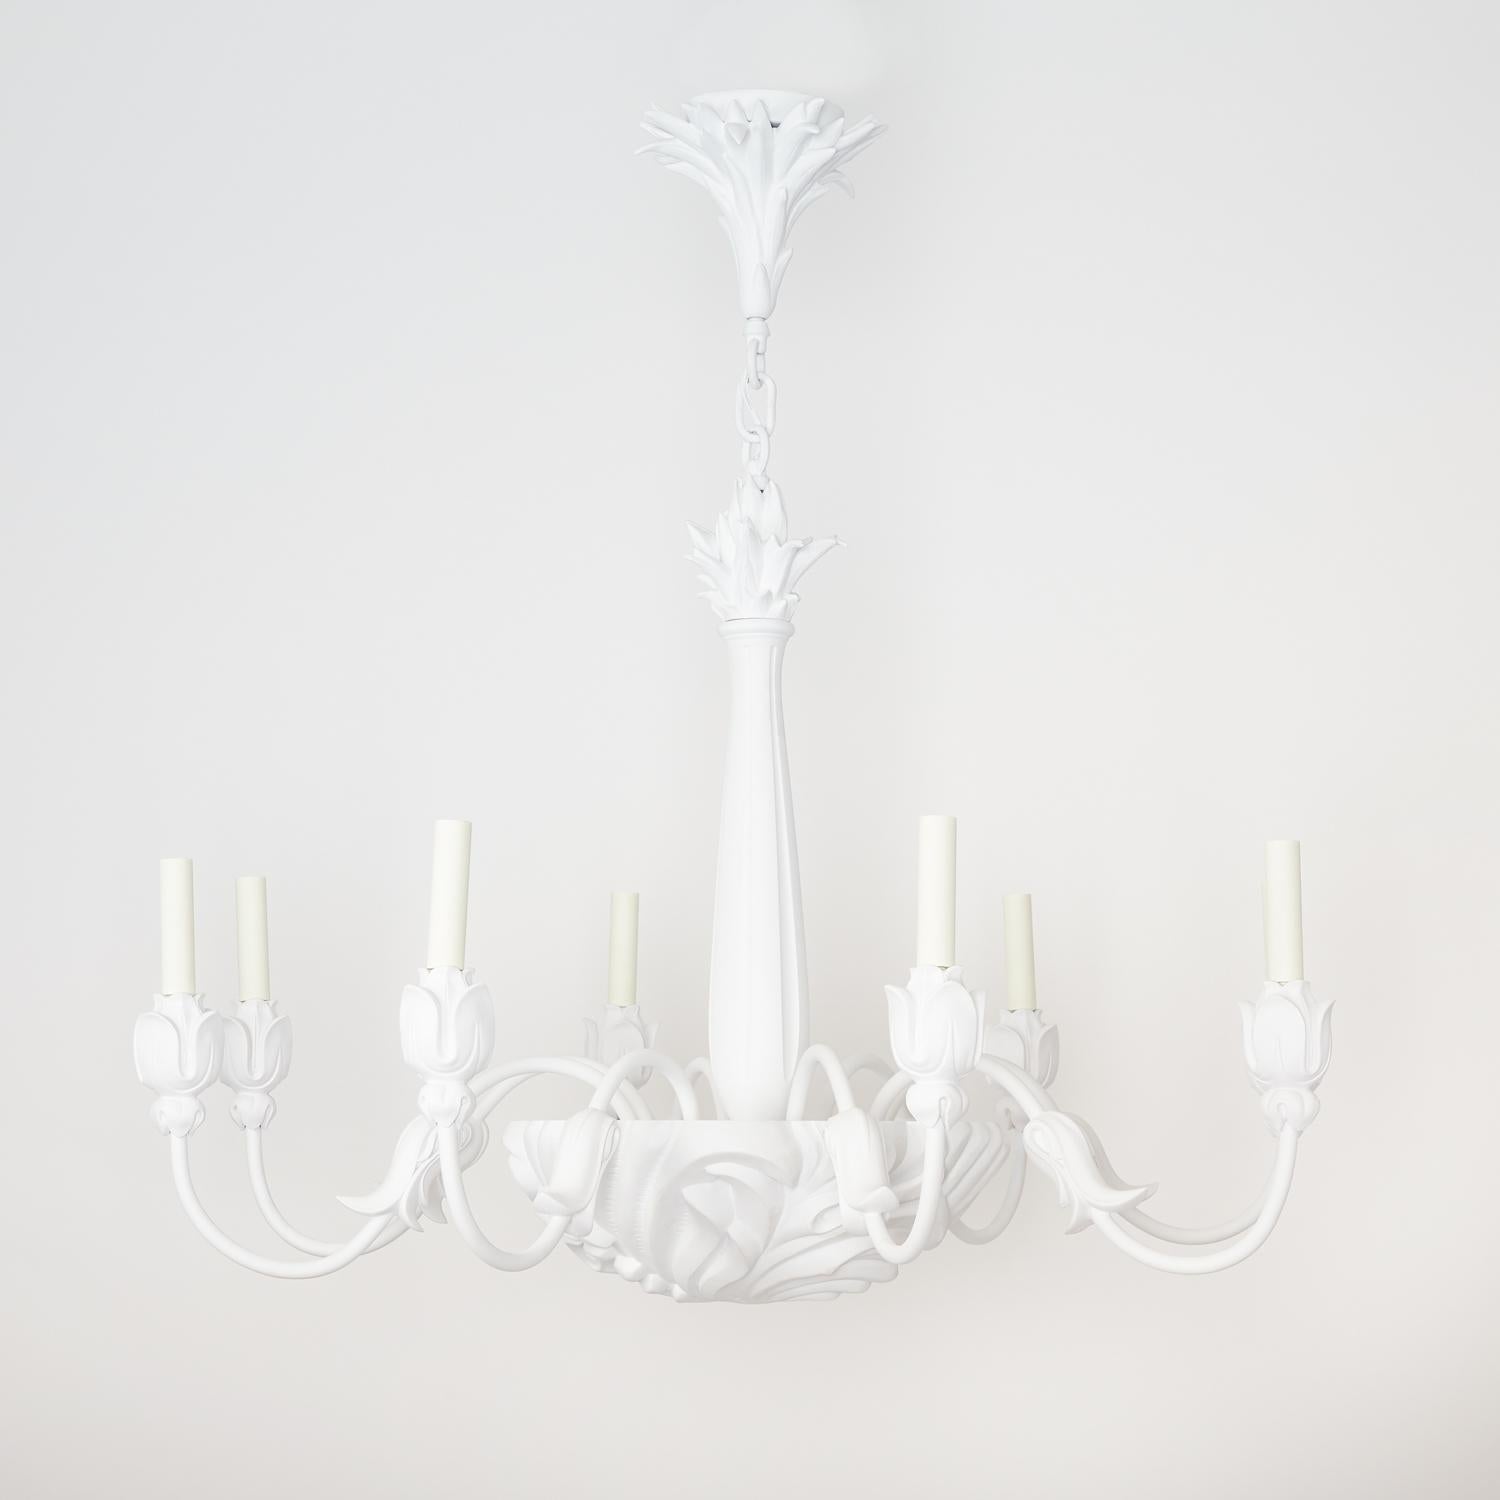 A single-tiered 8-light chandelier with shell formed dish, secured on underside by over-sized finial, the dish issuing metal candle-arms with applied leaf-shaped ornaments and lotus-form bobeches. The resin and elements secured to metal frame.